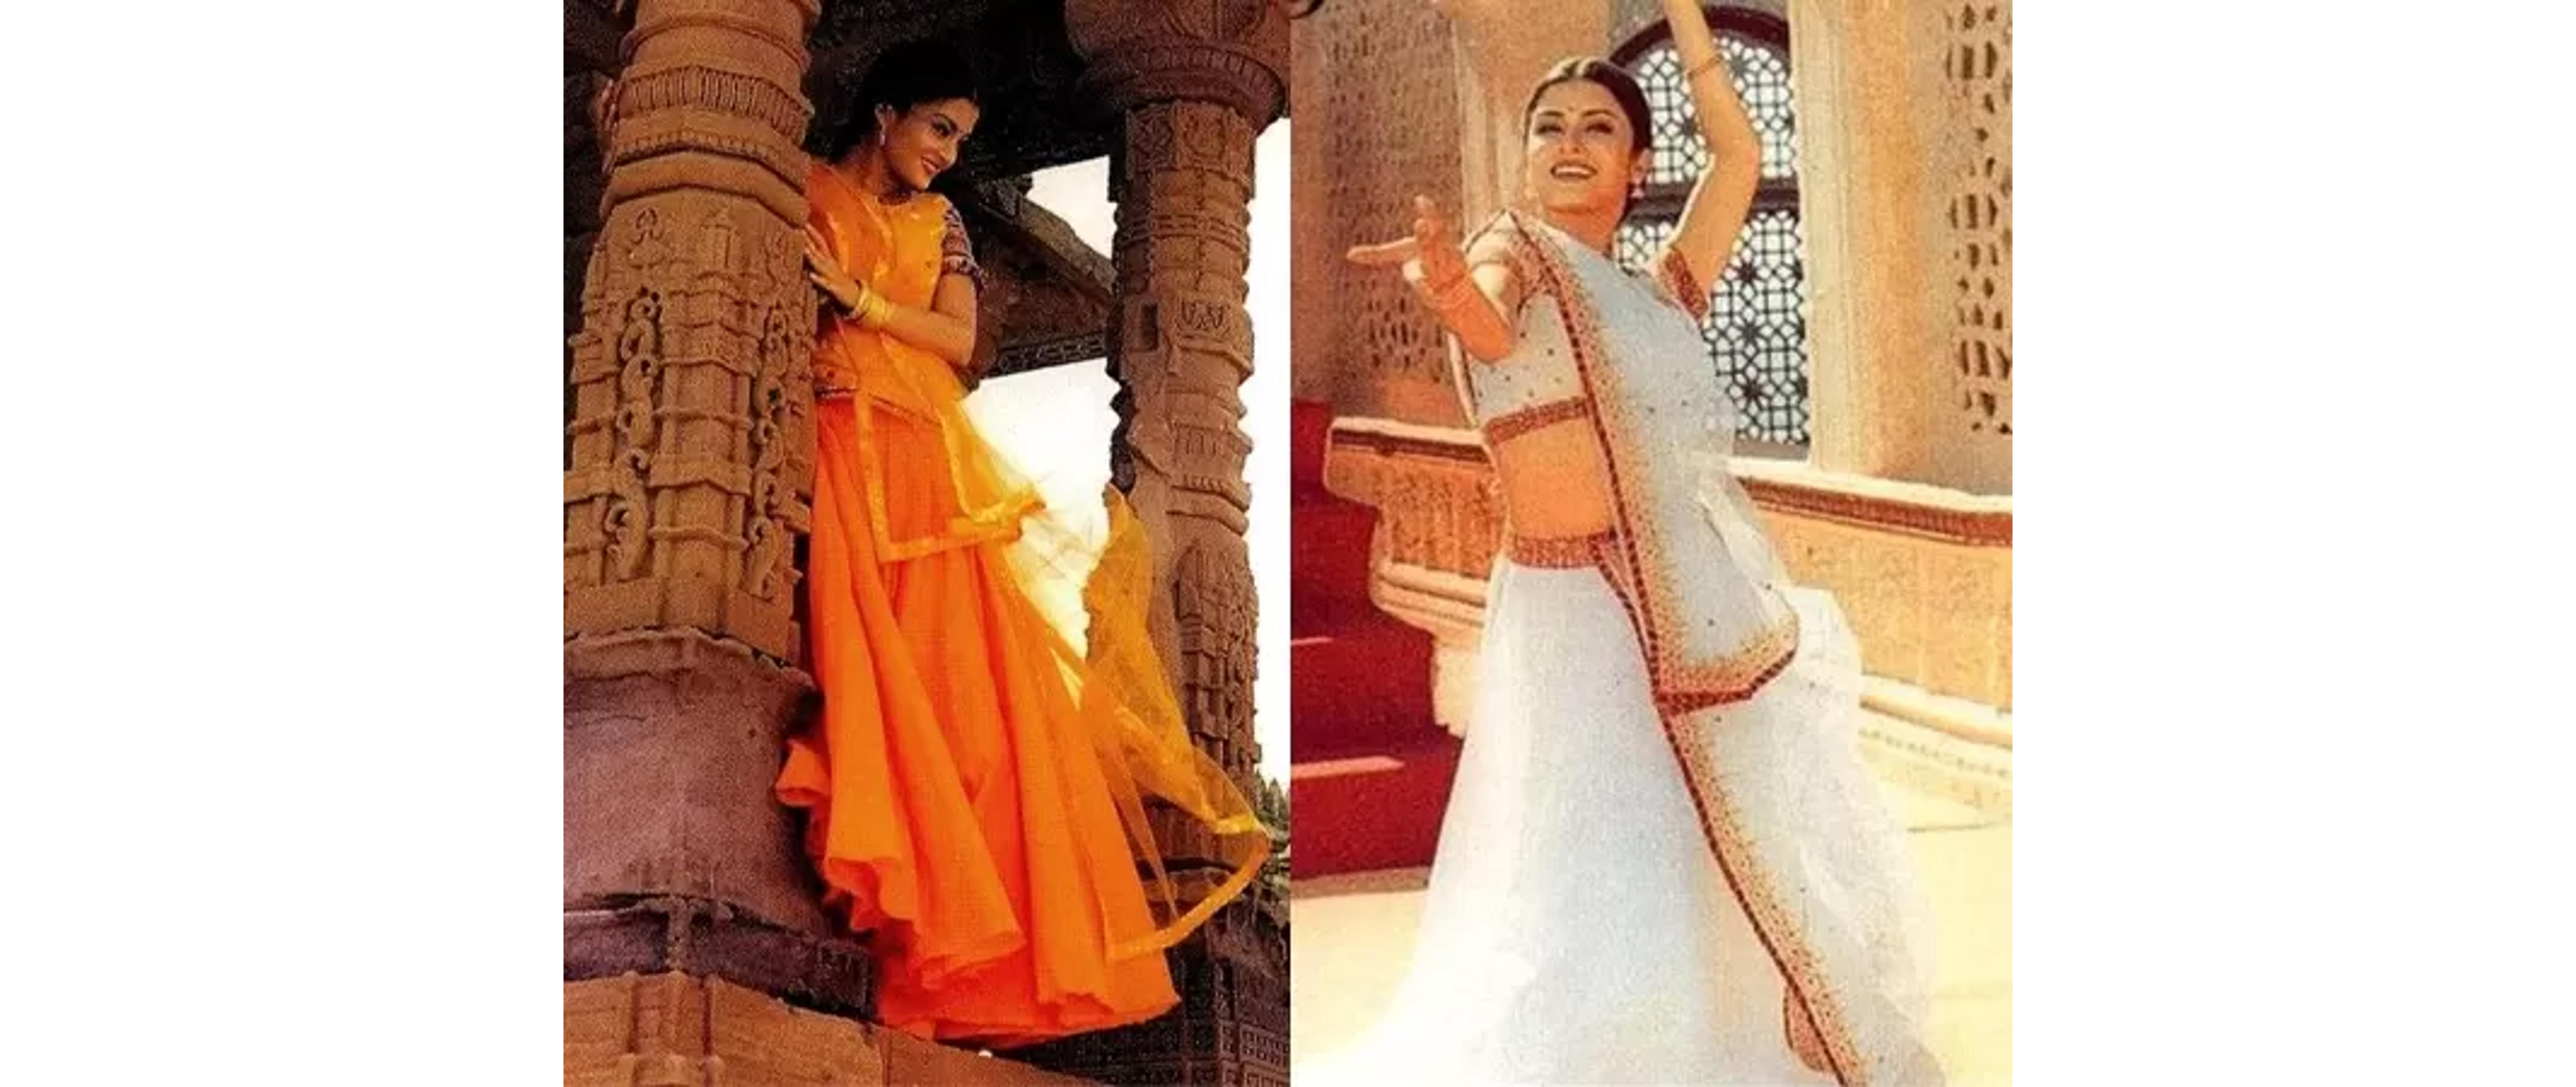 Sarees underwent a transformation, featuring deep-cut blouses and noodle straps for suits. Aishwarya Rai dazzled in 'Hum Dil De Chuke Sanam' with her stunning choli and ghagra combination, and also embraced the saree look with grace in subsequent years of the decade.